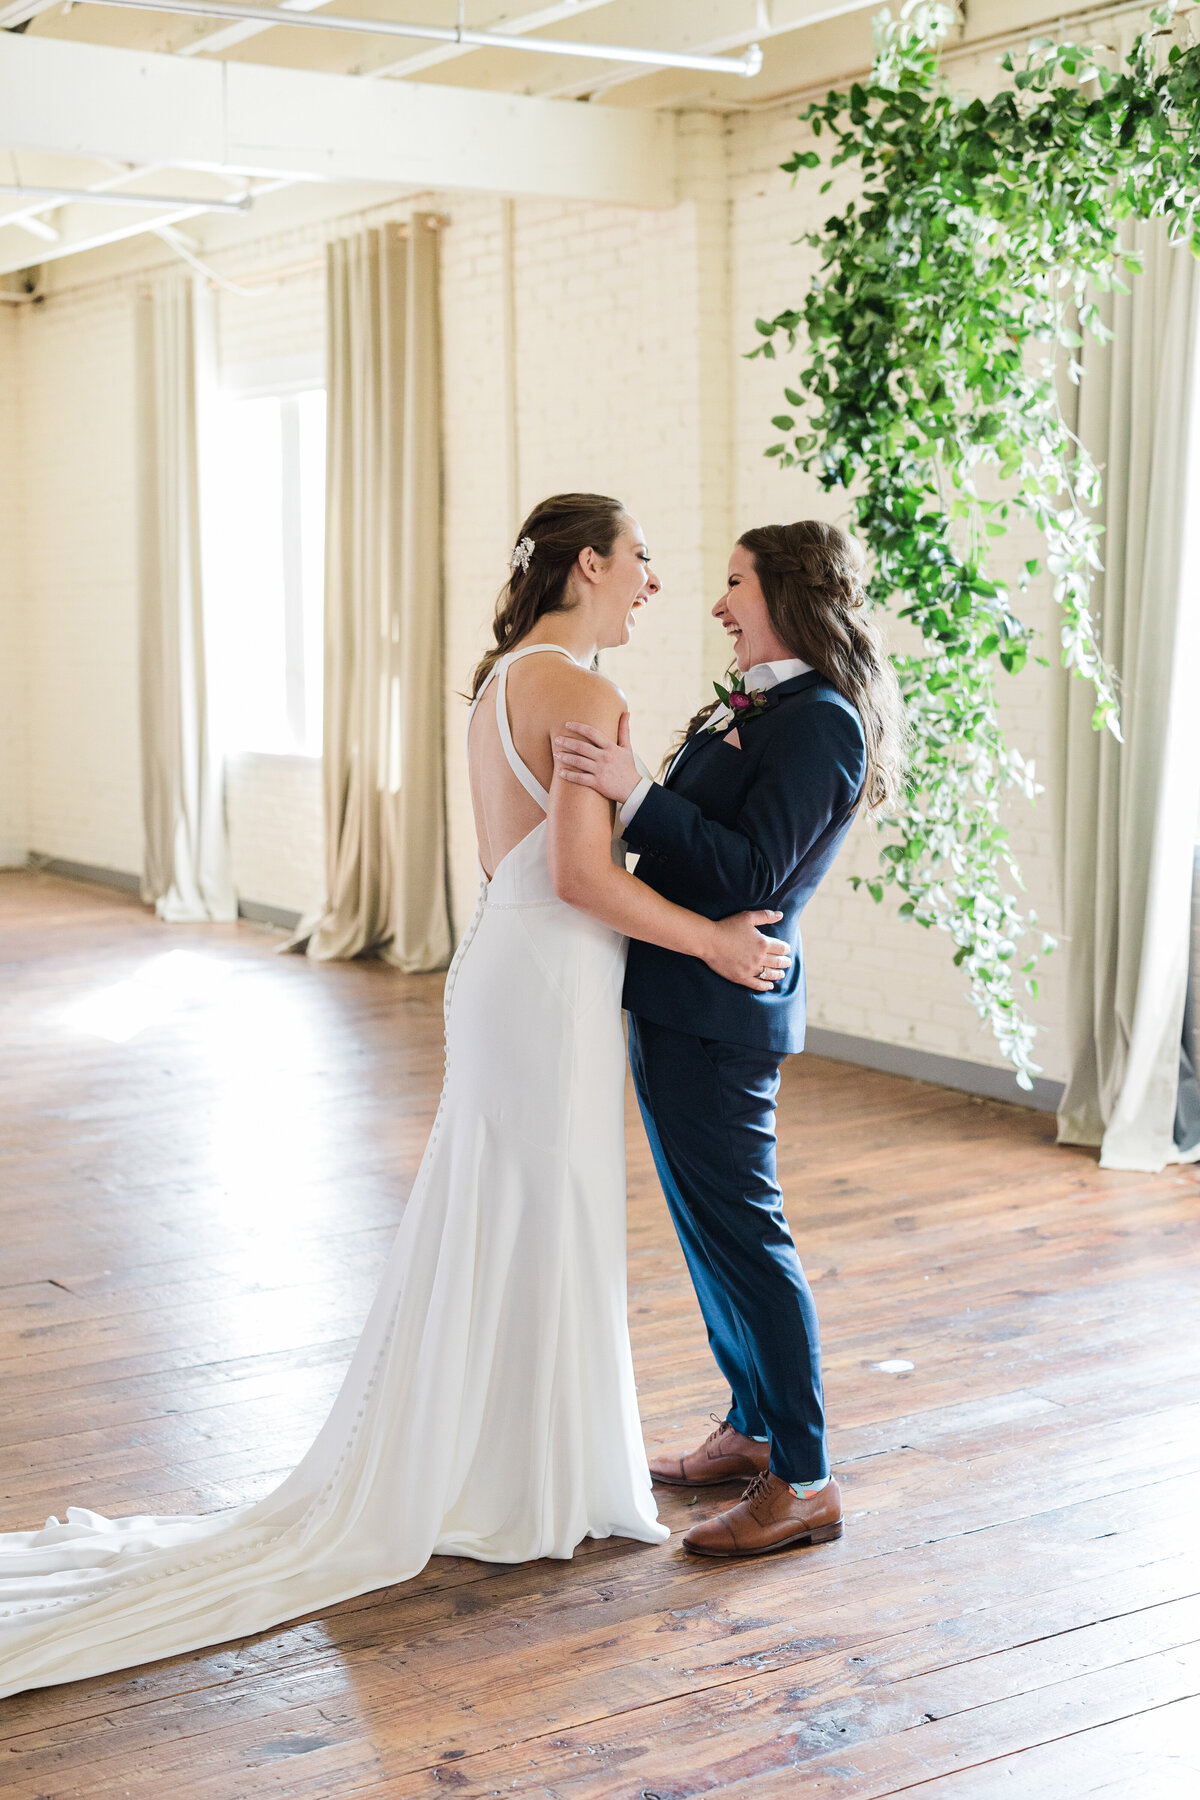 A candid shot of two brides during their first look before their wedding ceremony at the BRIK Venue in Fort Worth, Texas. They are both pulling each other close and laughing. The bride on the left is wearing a long, flowing, white dress, and the bride on the right is wearing a blue suit with brown dress shoes and a boutonniere.